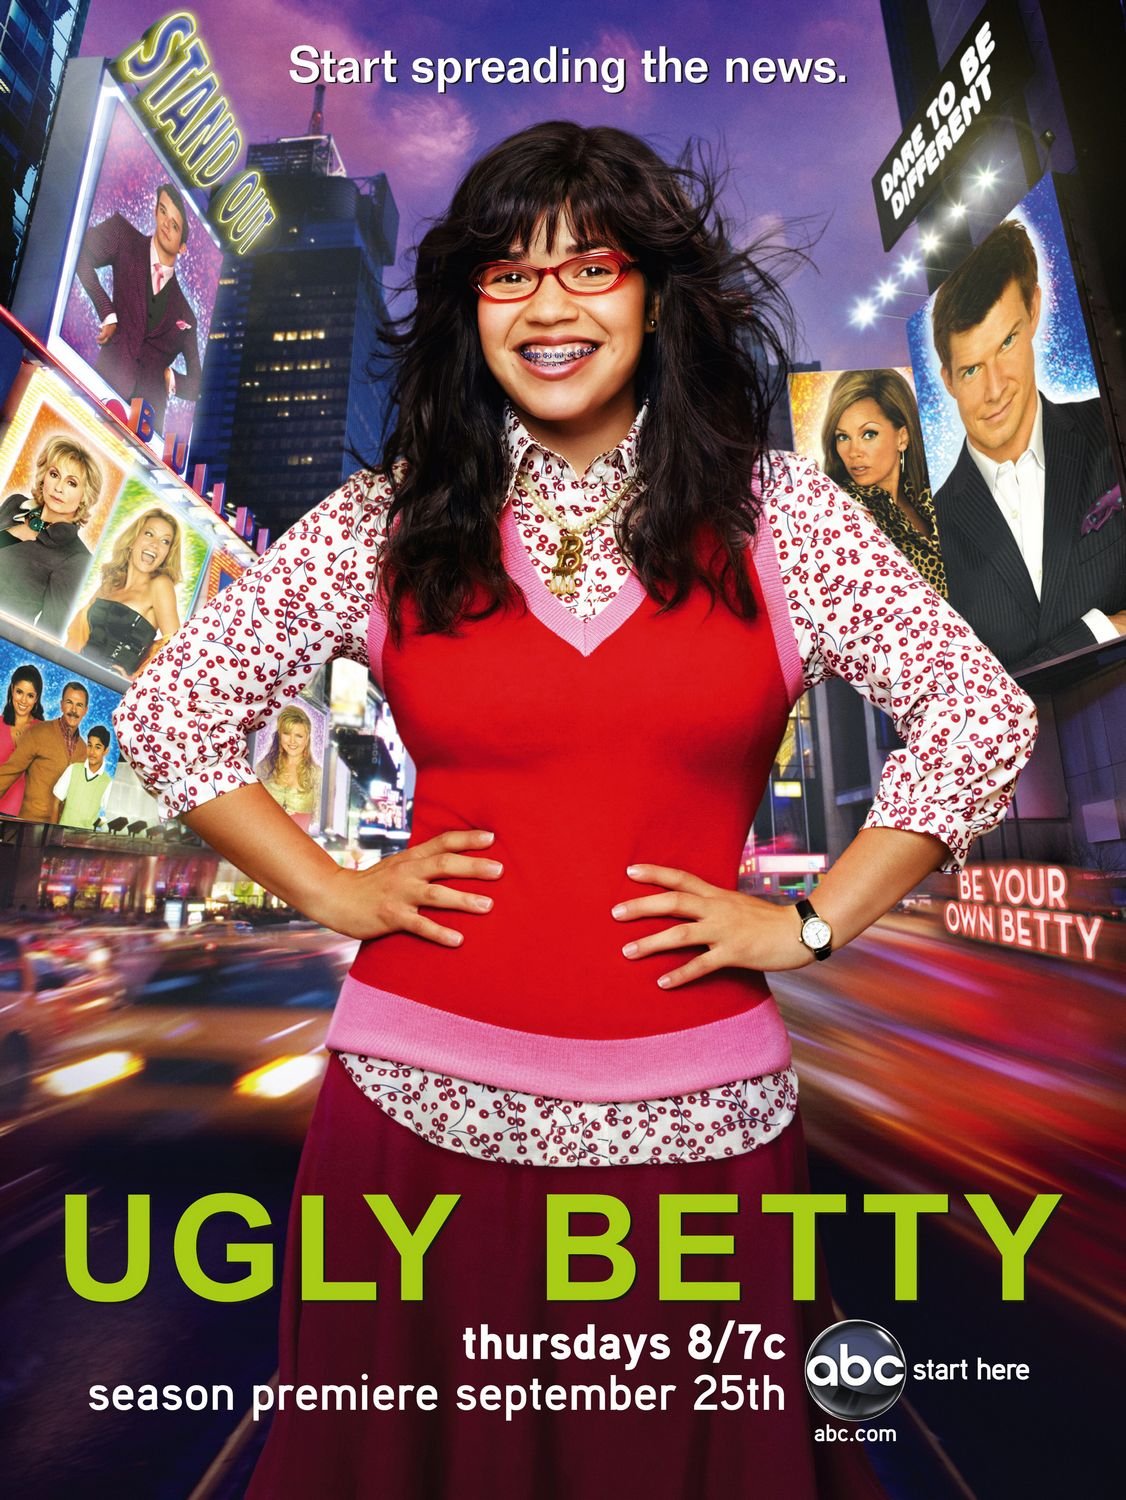 http://www.tvposter.net/posters/ugly_betty_2006_305_poster.jpg